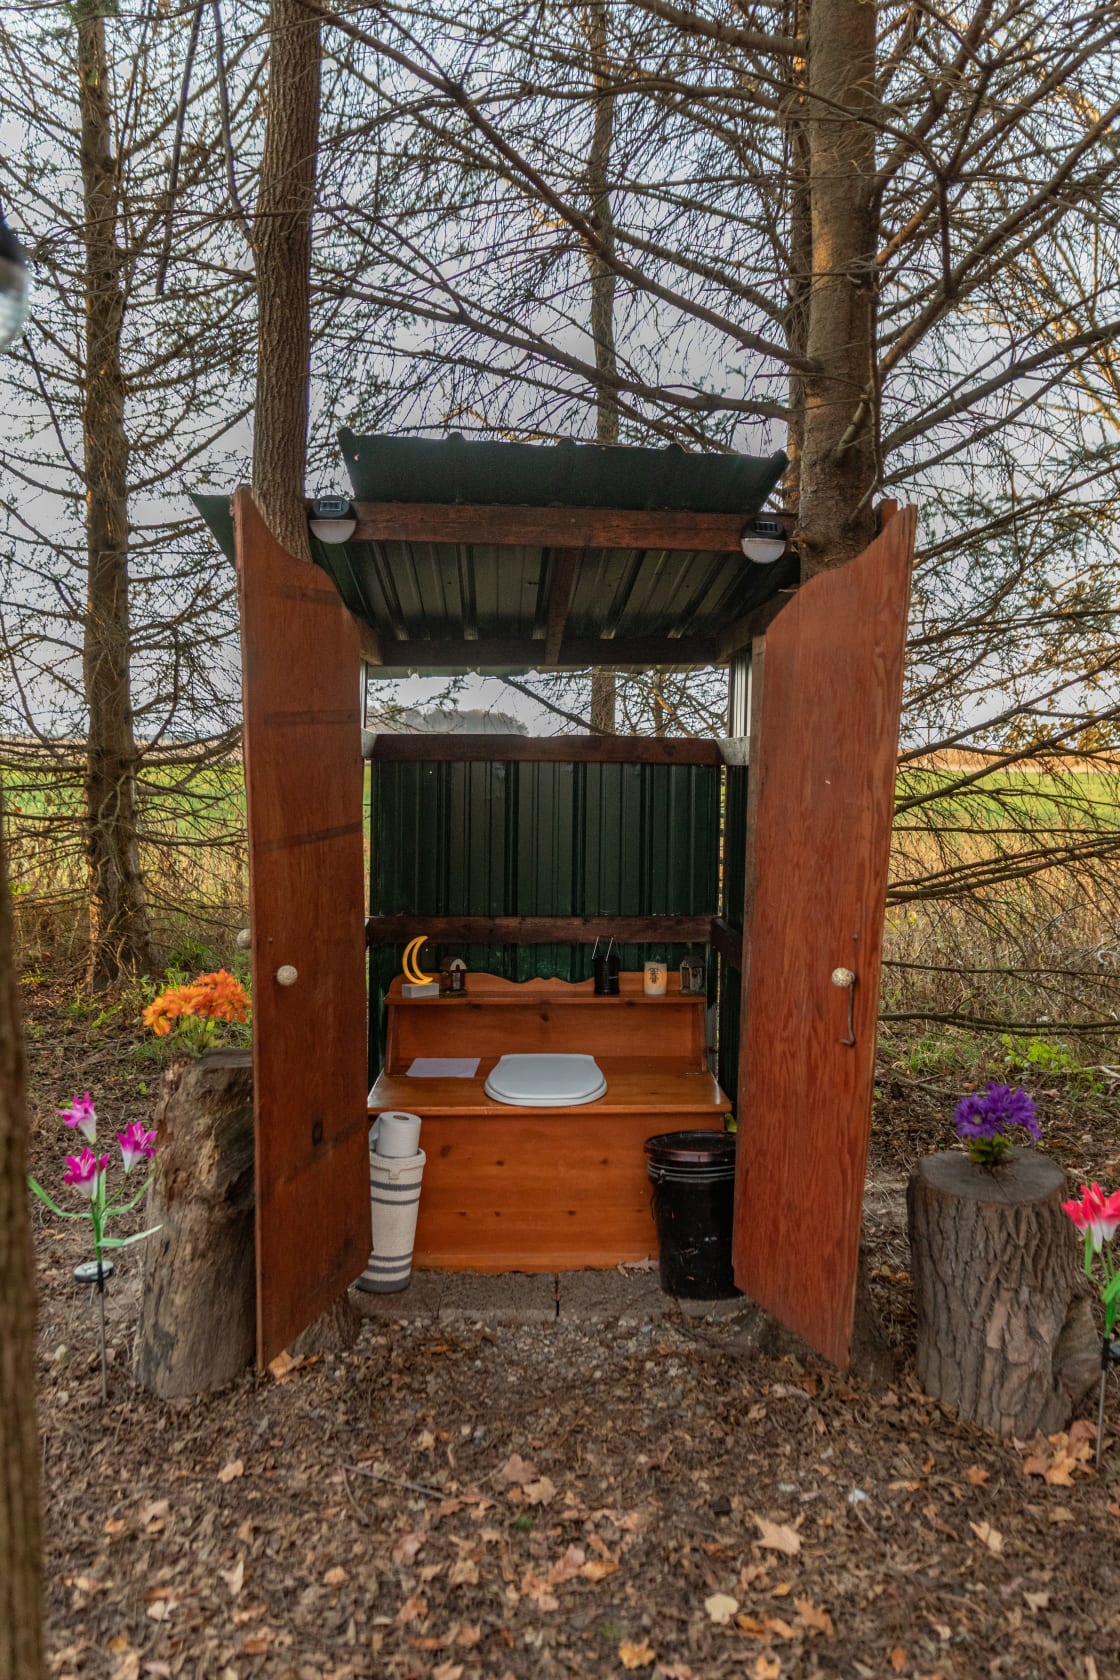 The composting toilet outhouse with lights that turn on at night.